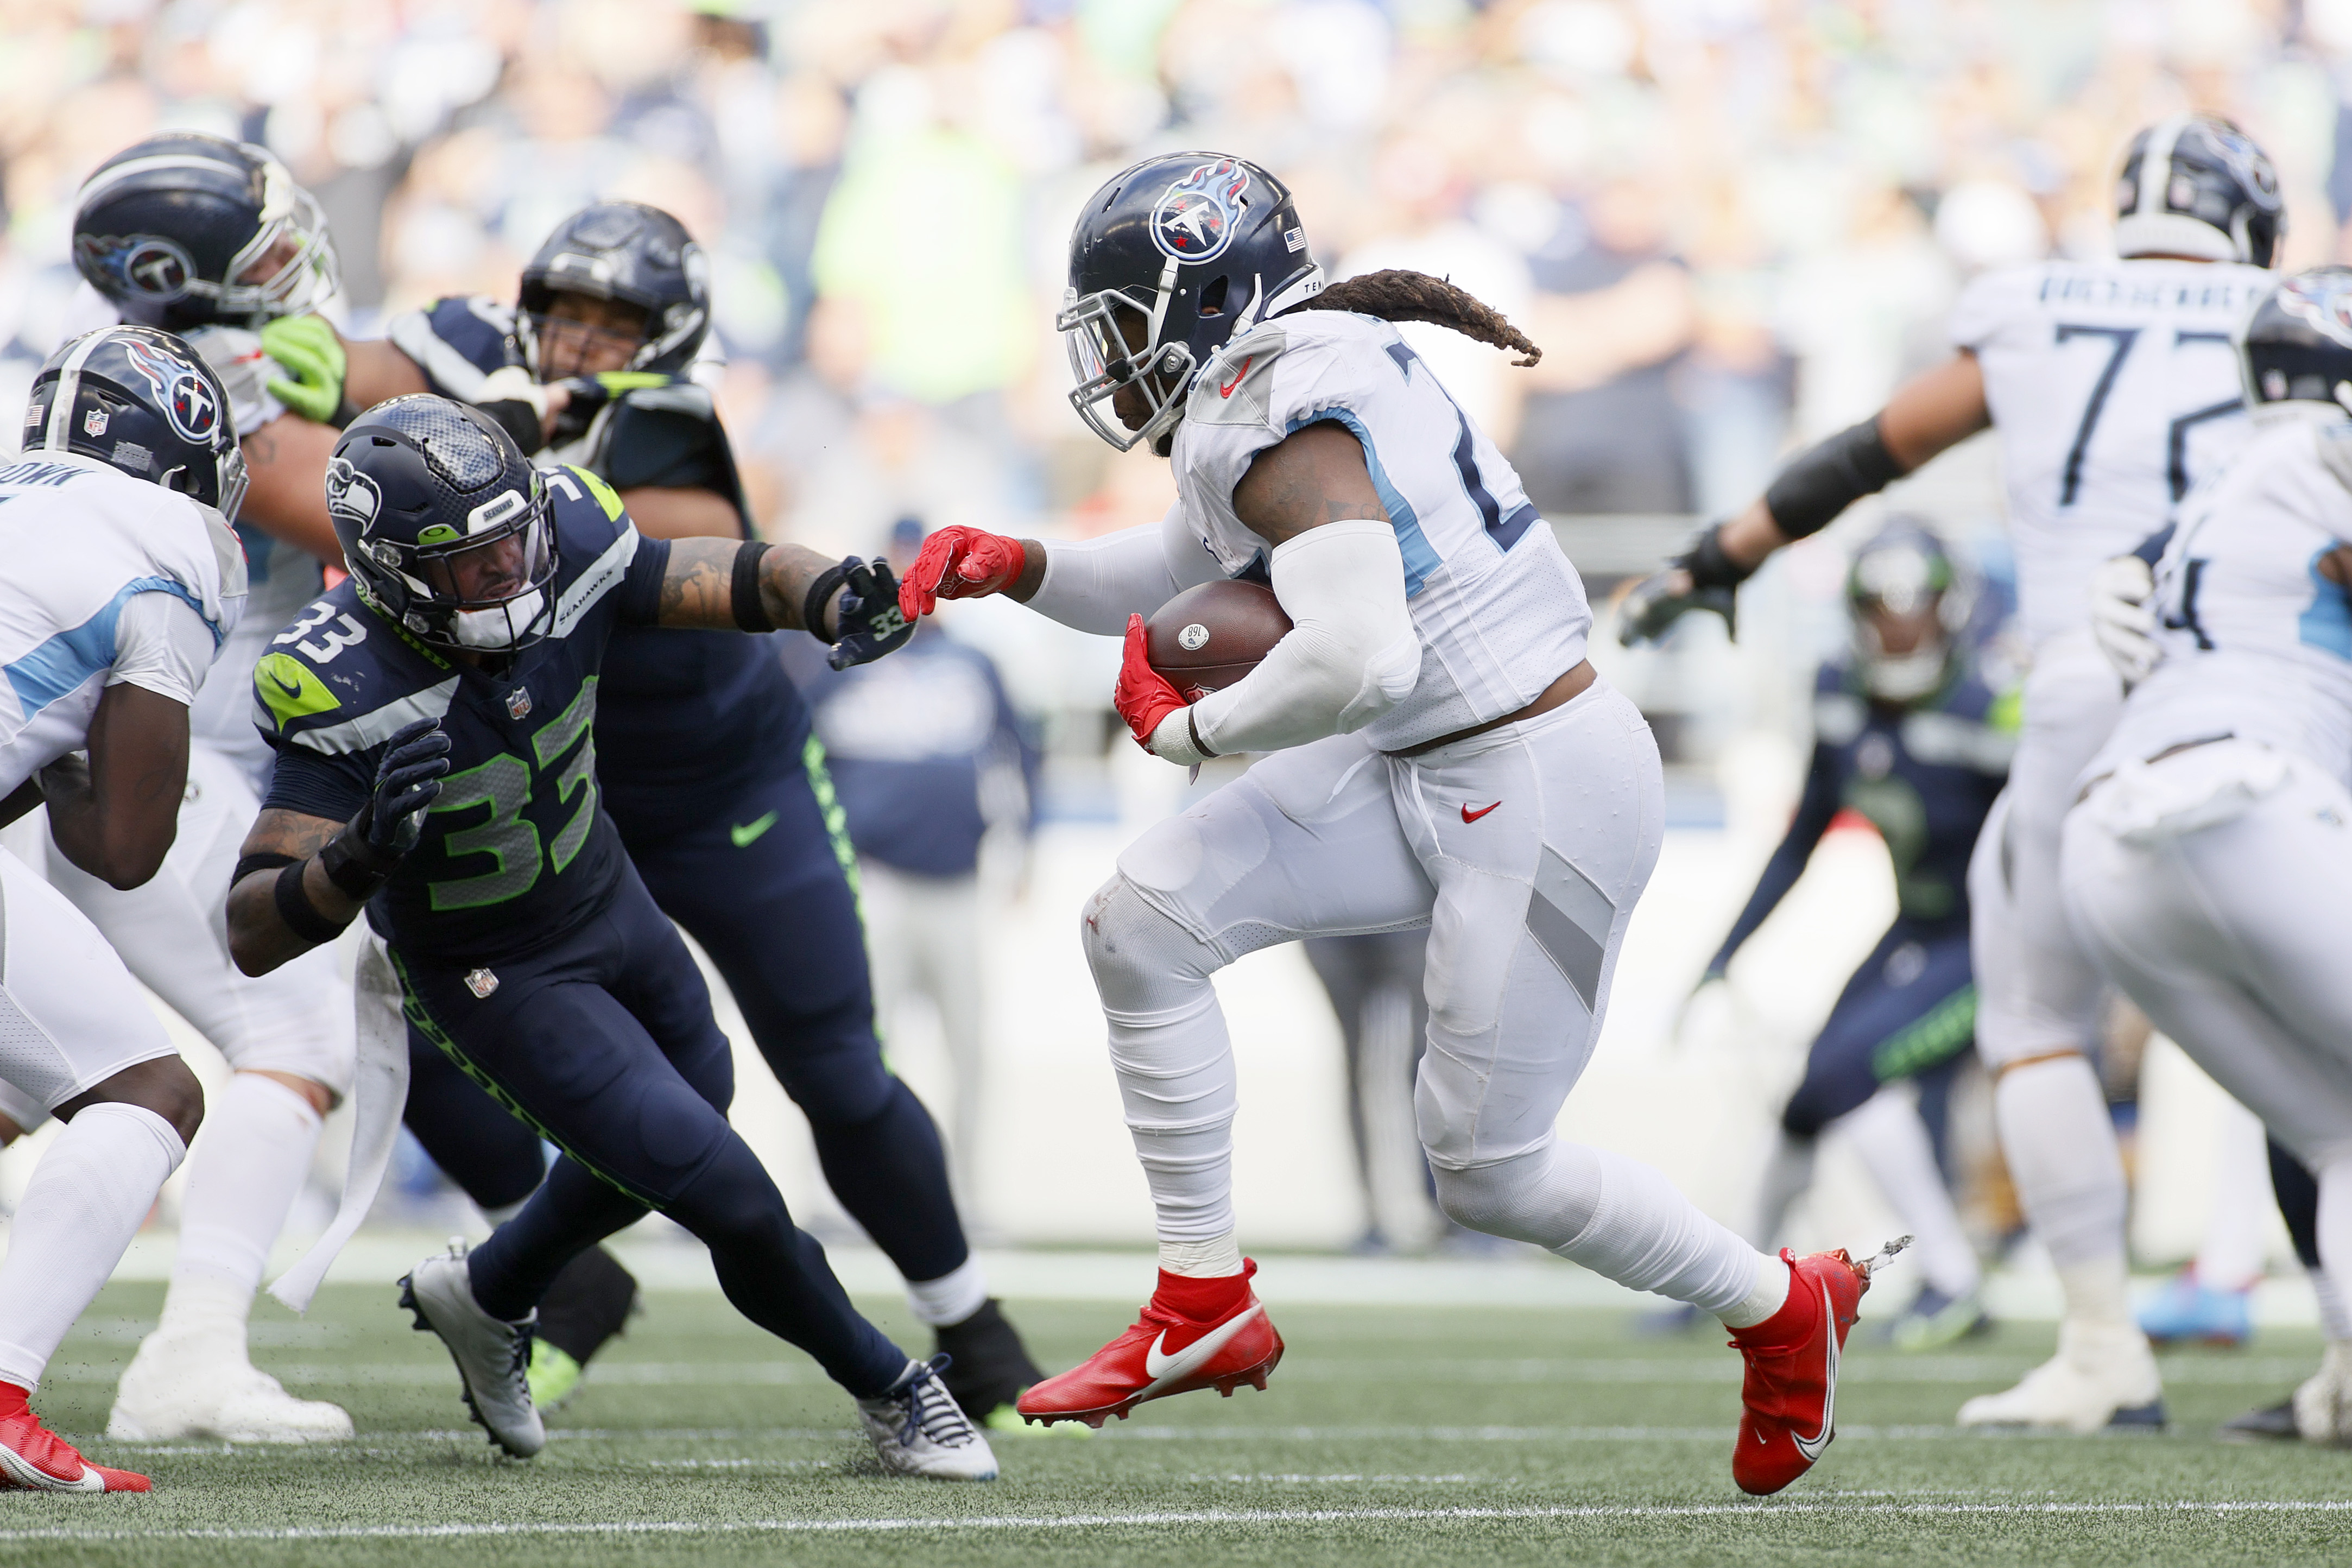 Titans running back Derrick Henry in action against the Seahawks